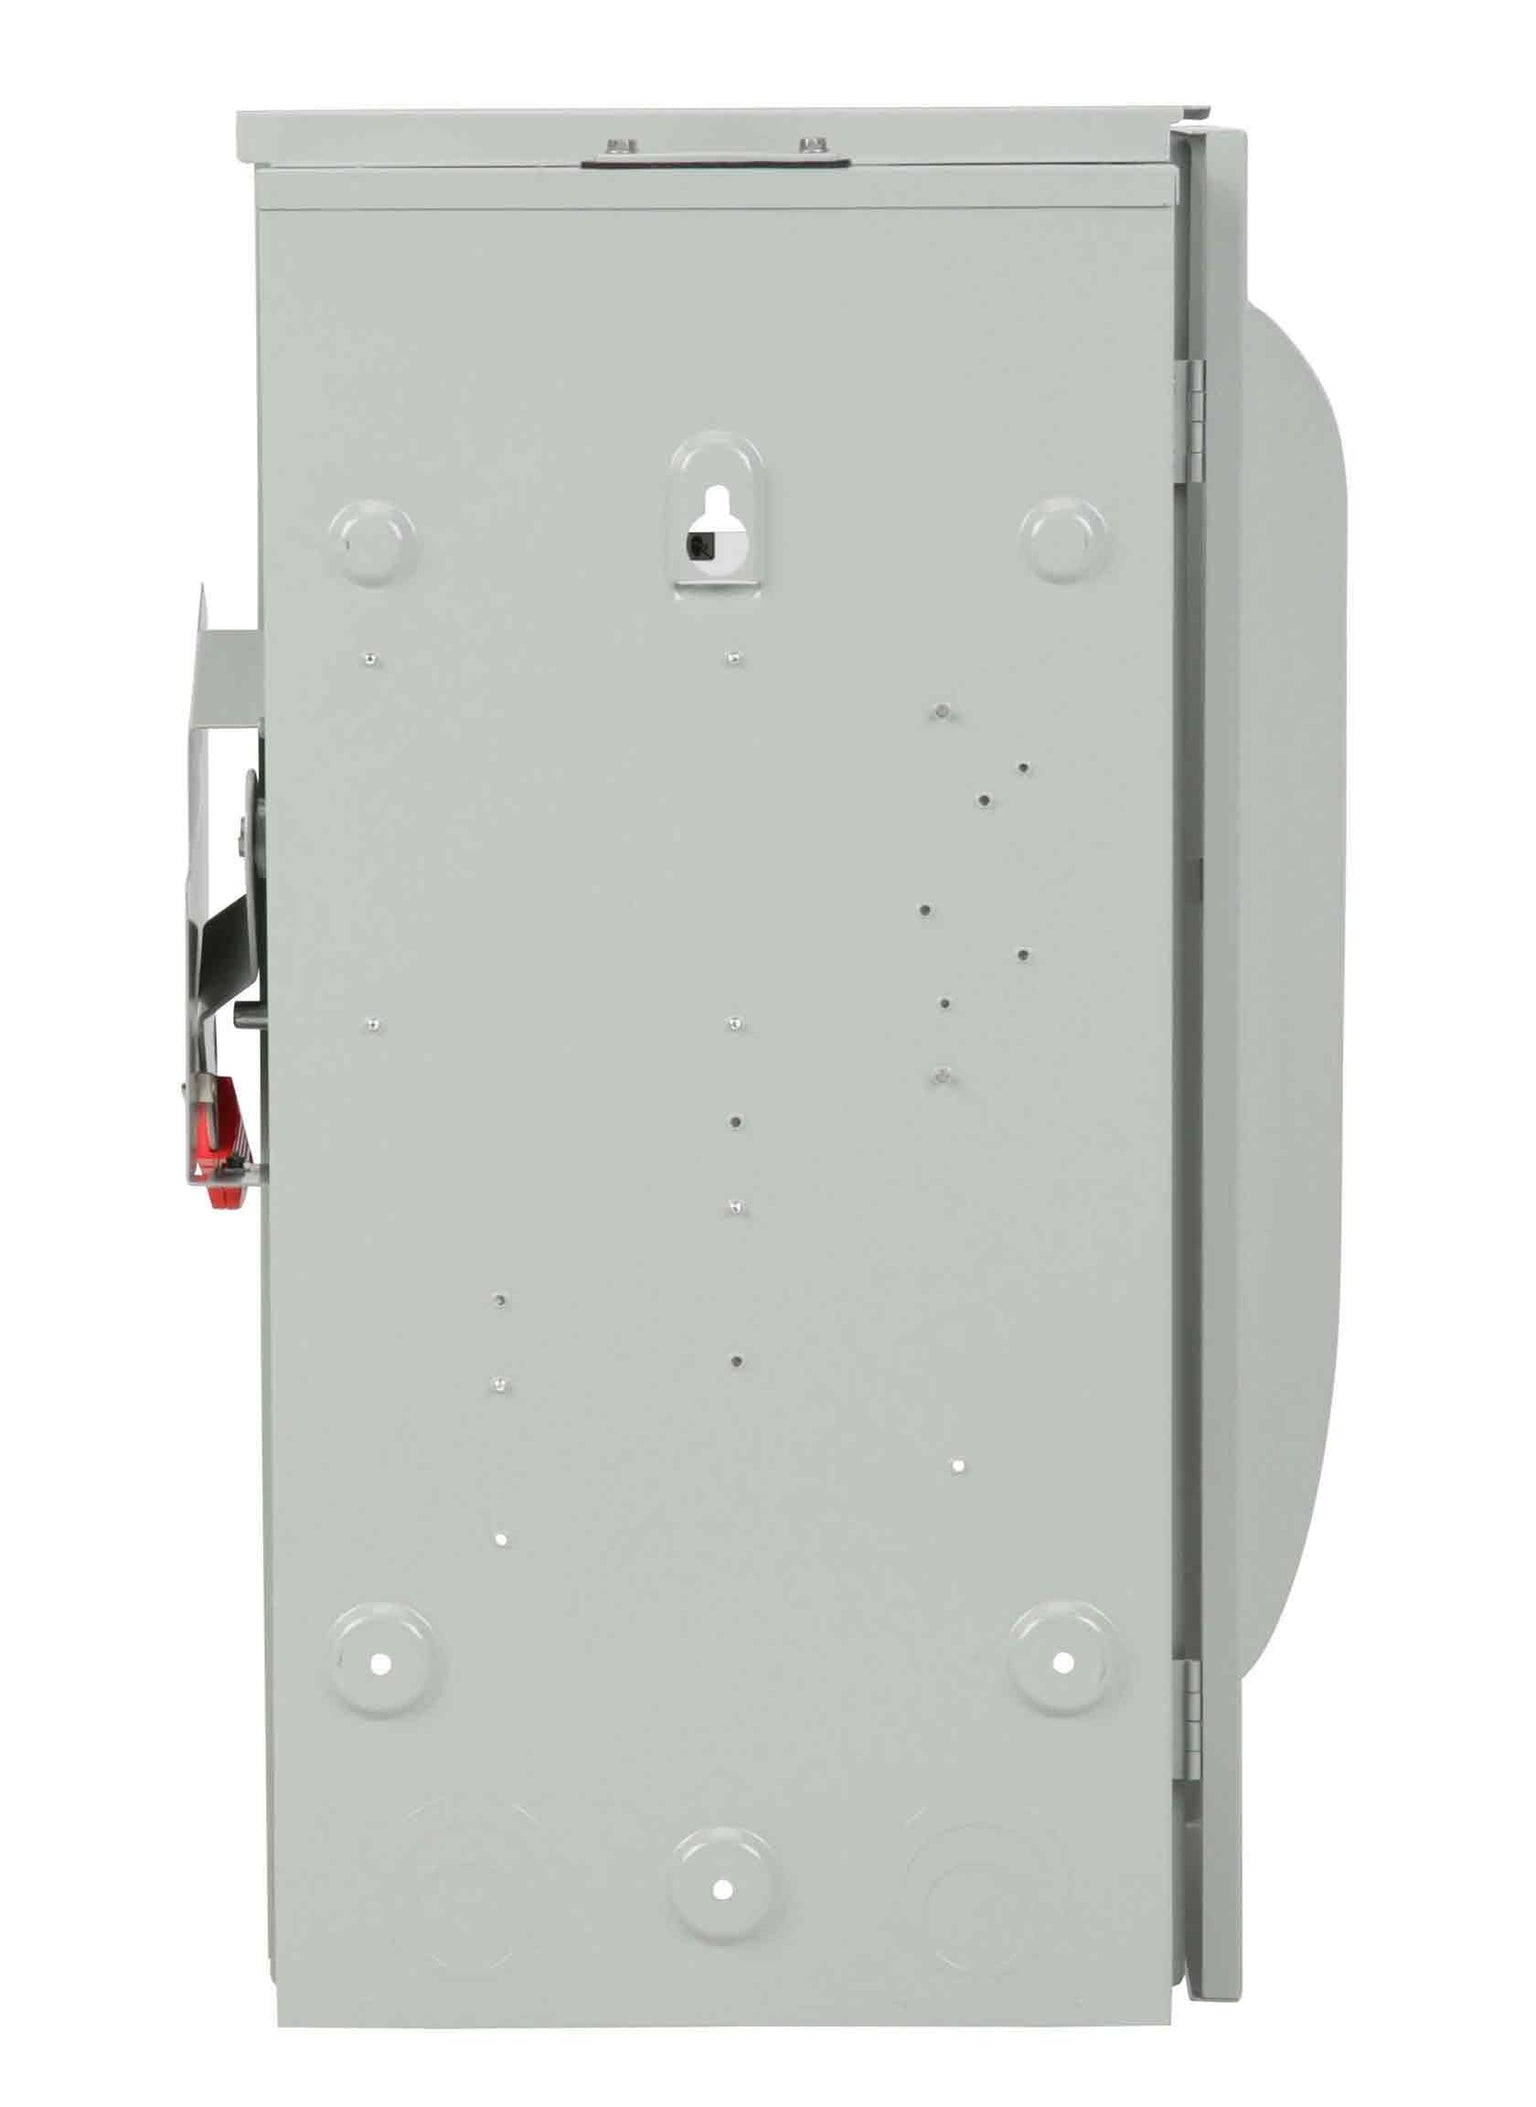 HFC324NR - Siemens - 200 Amp Disconnect Safety Switches